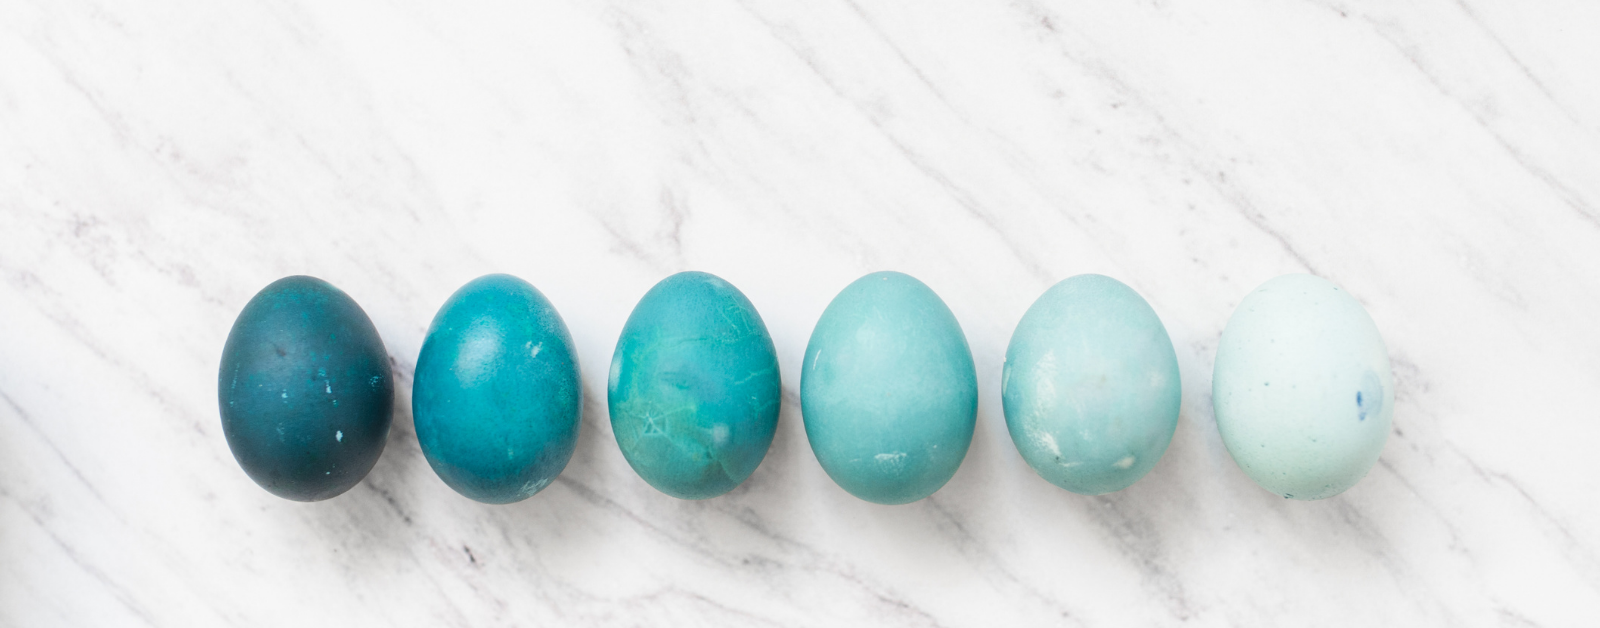 blue eggs on a white counter